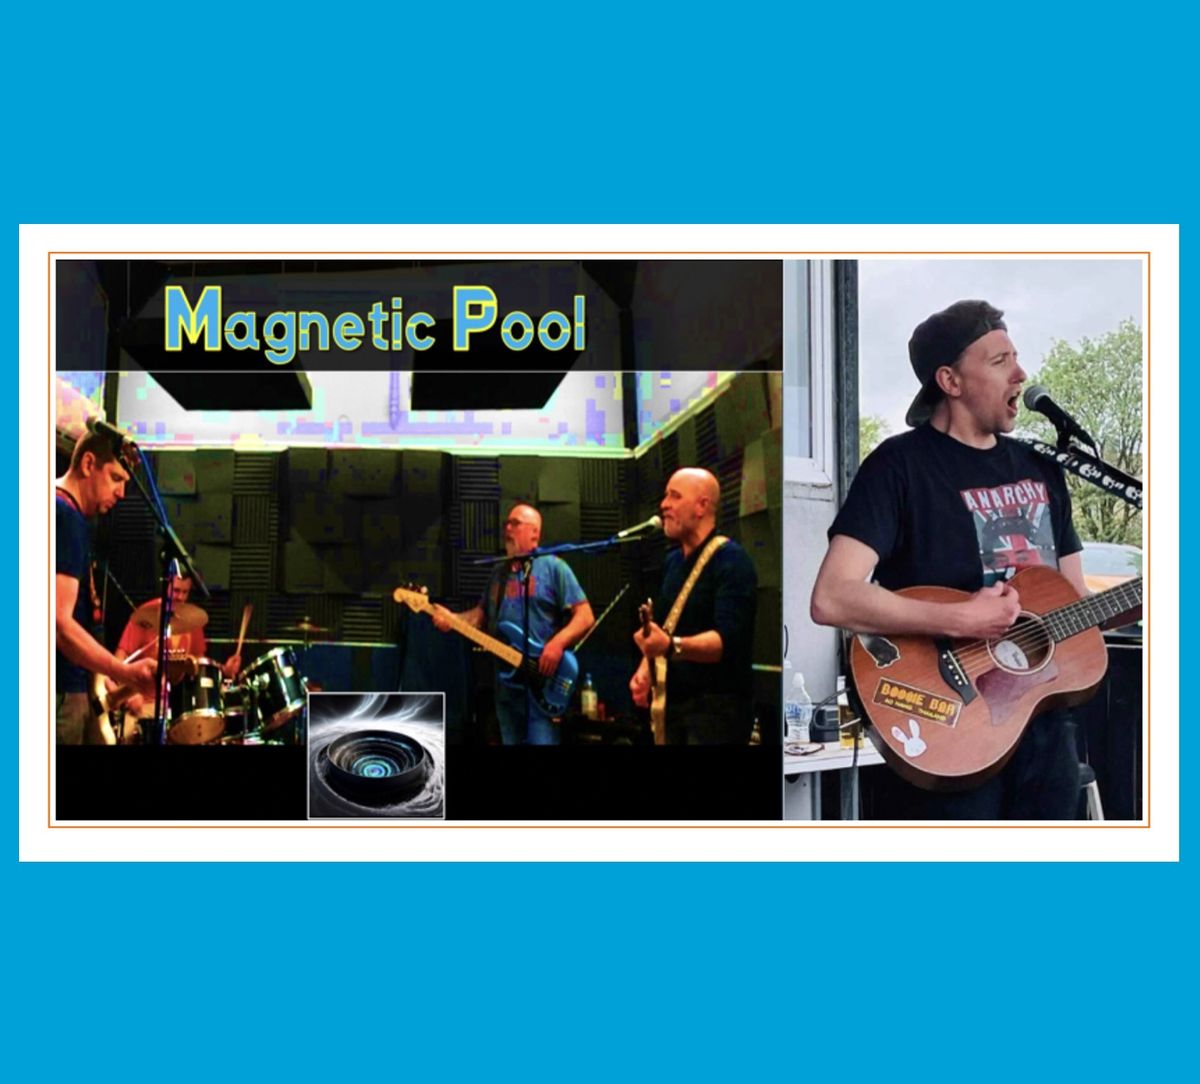 Magnetic Pool and Jake Cunnington